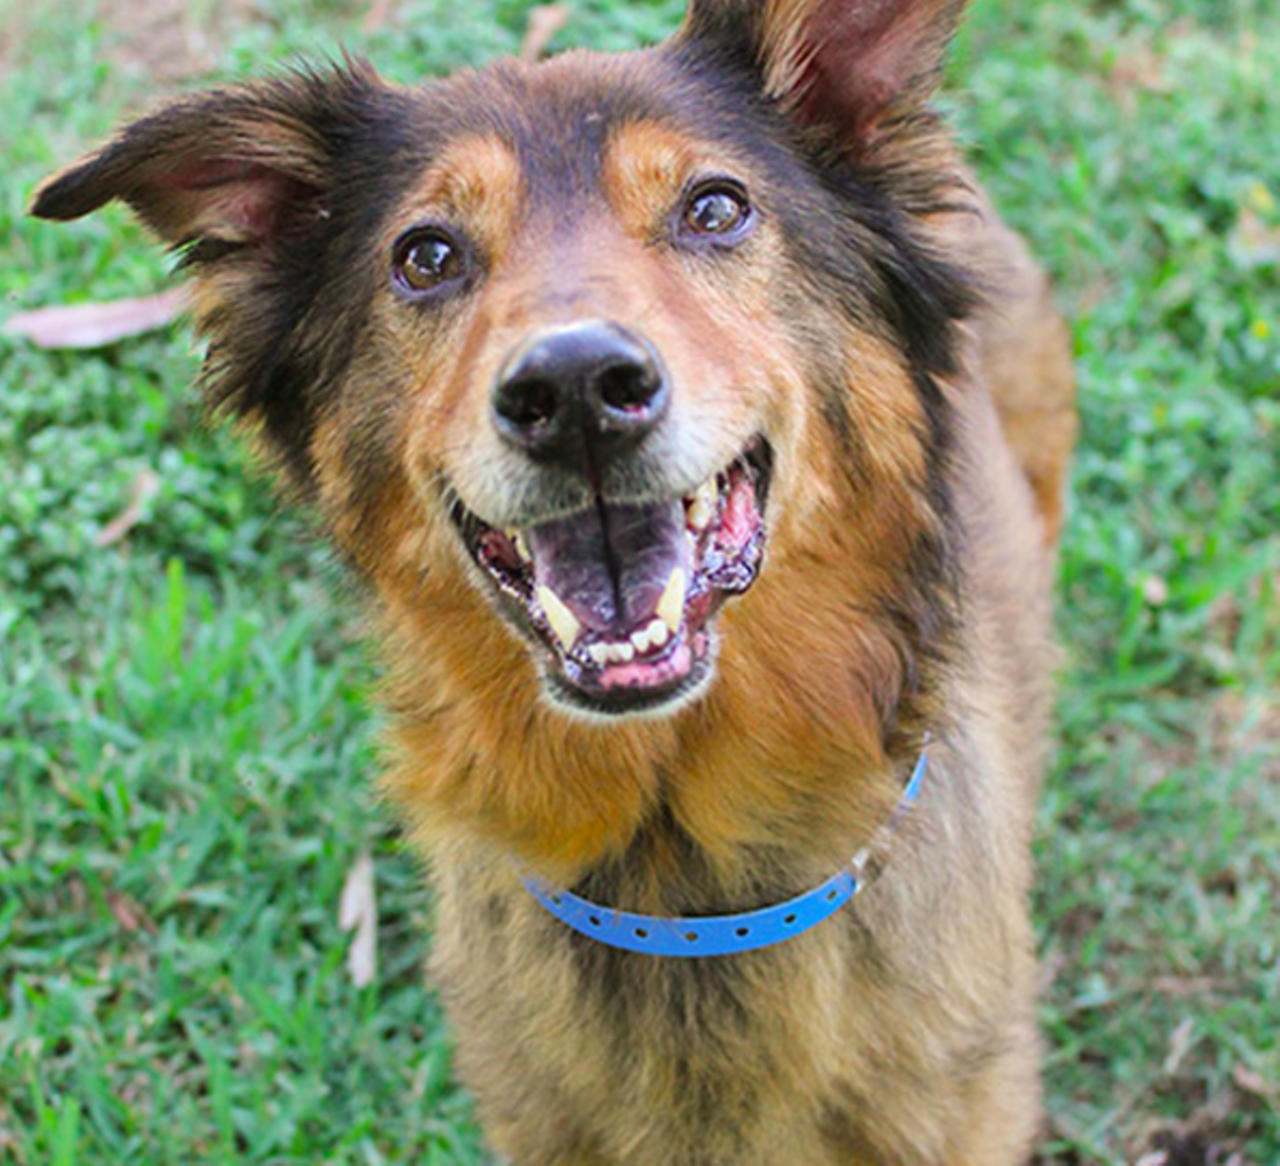 Simba
"You wouldn’t believe I’m an older gentleman when you see me trotting around, but hey, when you feel good, you show it. I’m gentle but playful. Whoever said fun was for the young didn’t know anything about age. I adore treats and will sit for them and then take them from your hand gently. You’ll notice my front legs are misshapen – they were probably injured in my youth and a bit of arthritis has set in, but medicine helps keep me frisky. I don’t worry and you shouldn’t either. Let’s just go home and have fun."